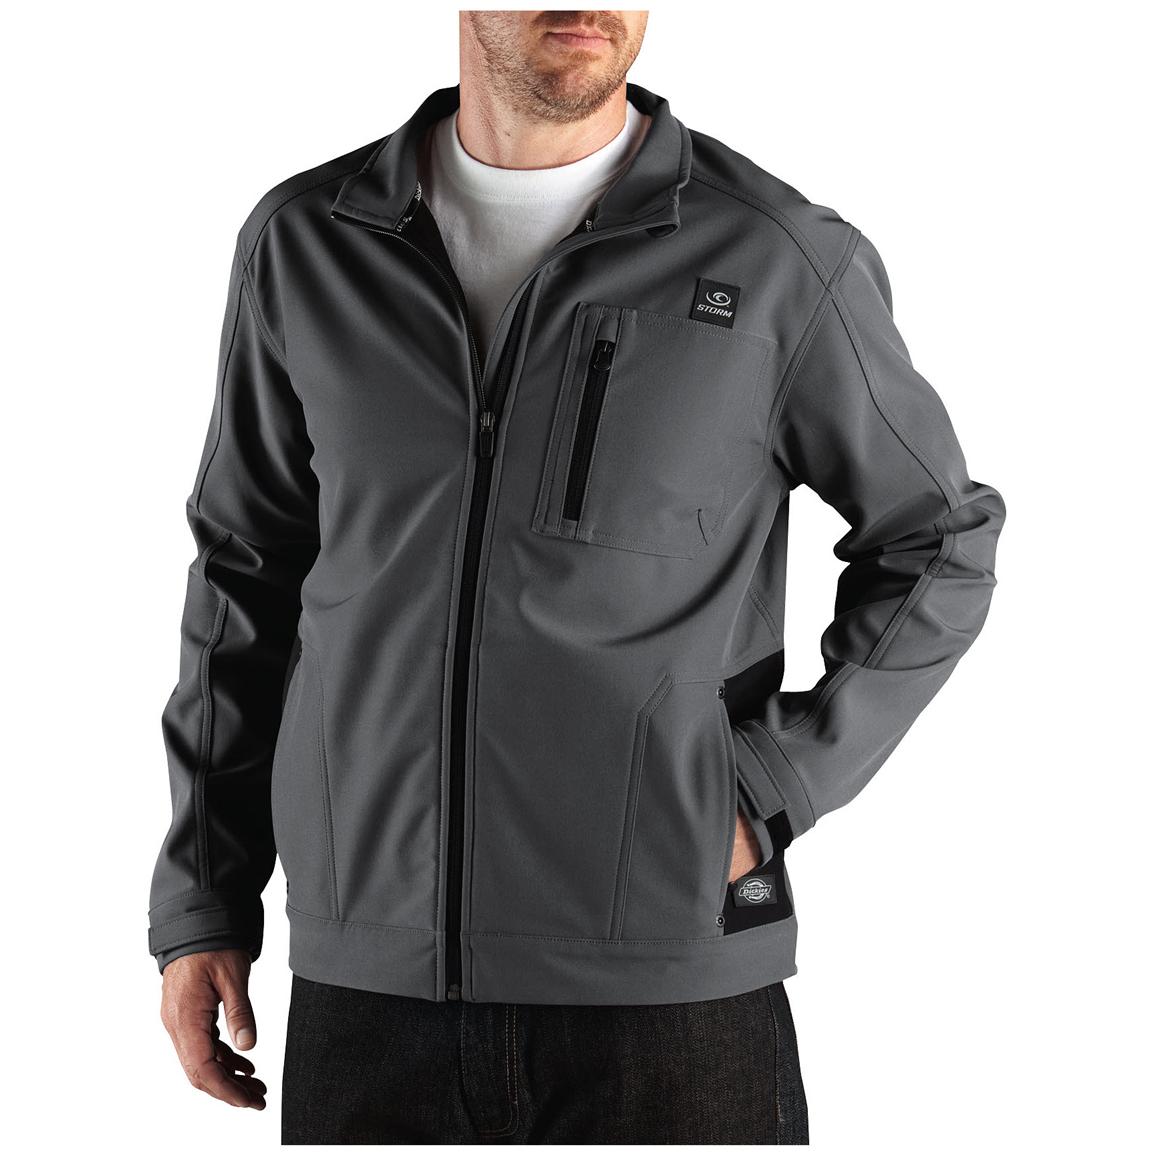 Dickies Performance Soft Shell Work Jacket - 421301, Insulated Jackets & Coats at Sportsman's Guide